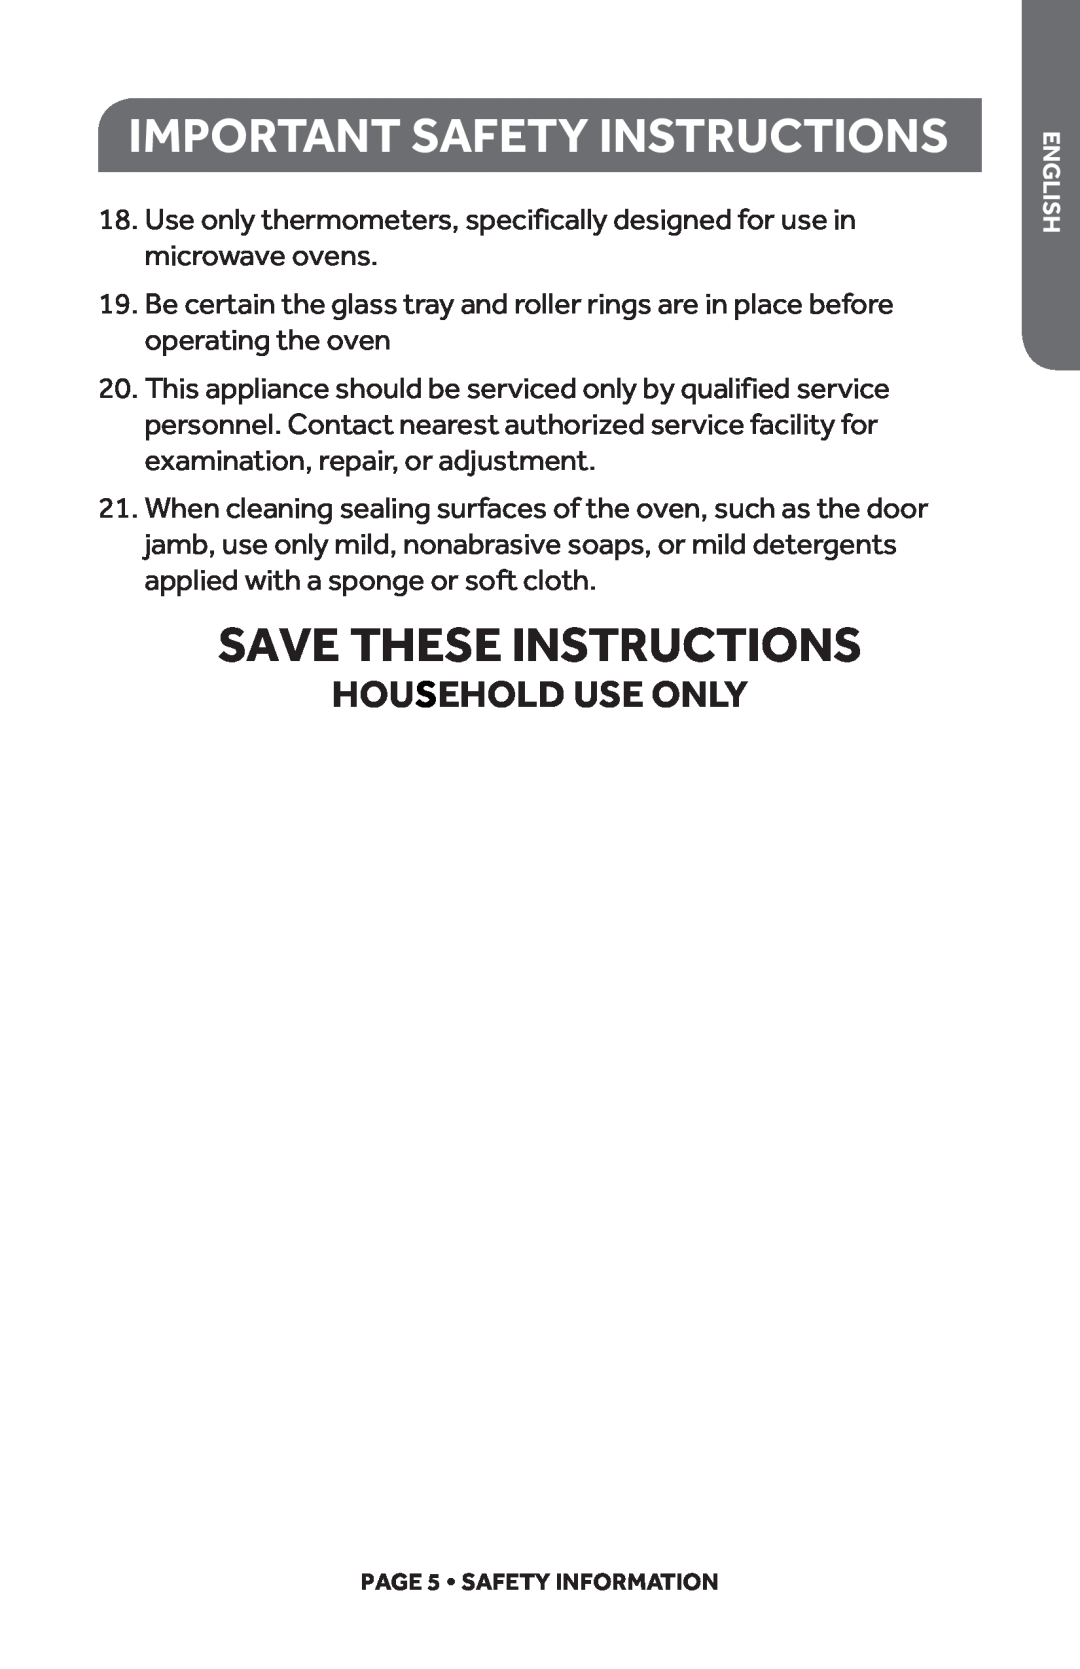 Haier HMC1120BEBB, HMC1120BEWW user manual Save These Instructions, Household Use Only, Important Safety Instructions 